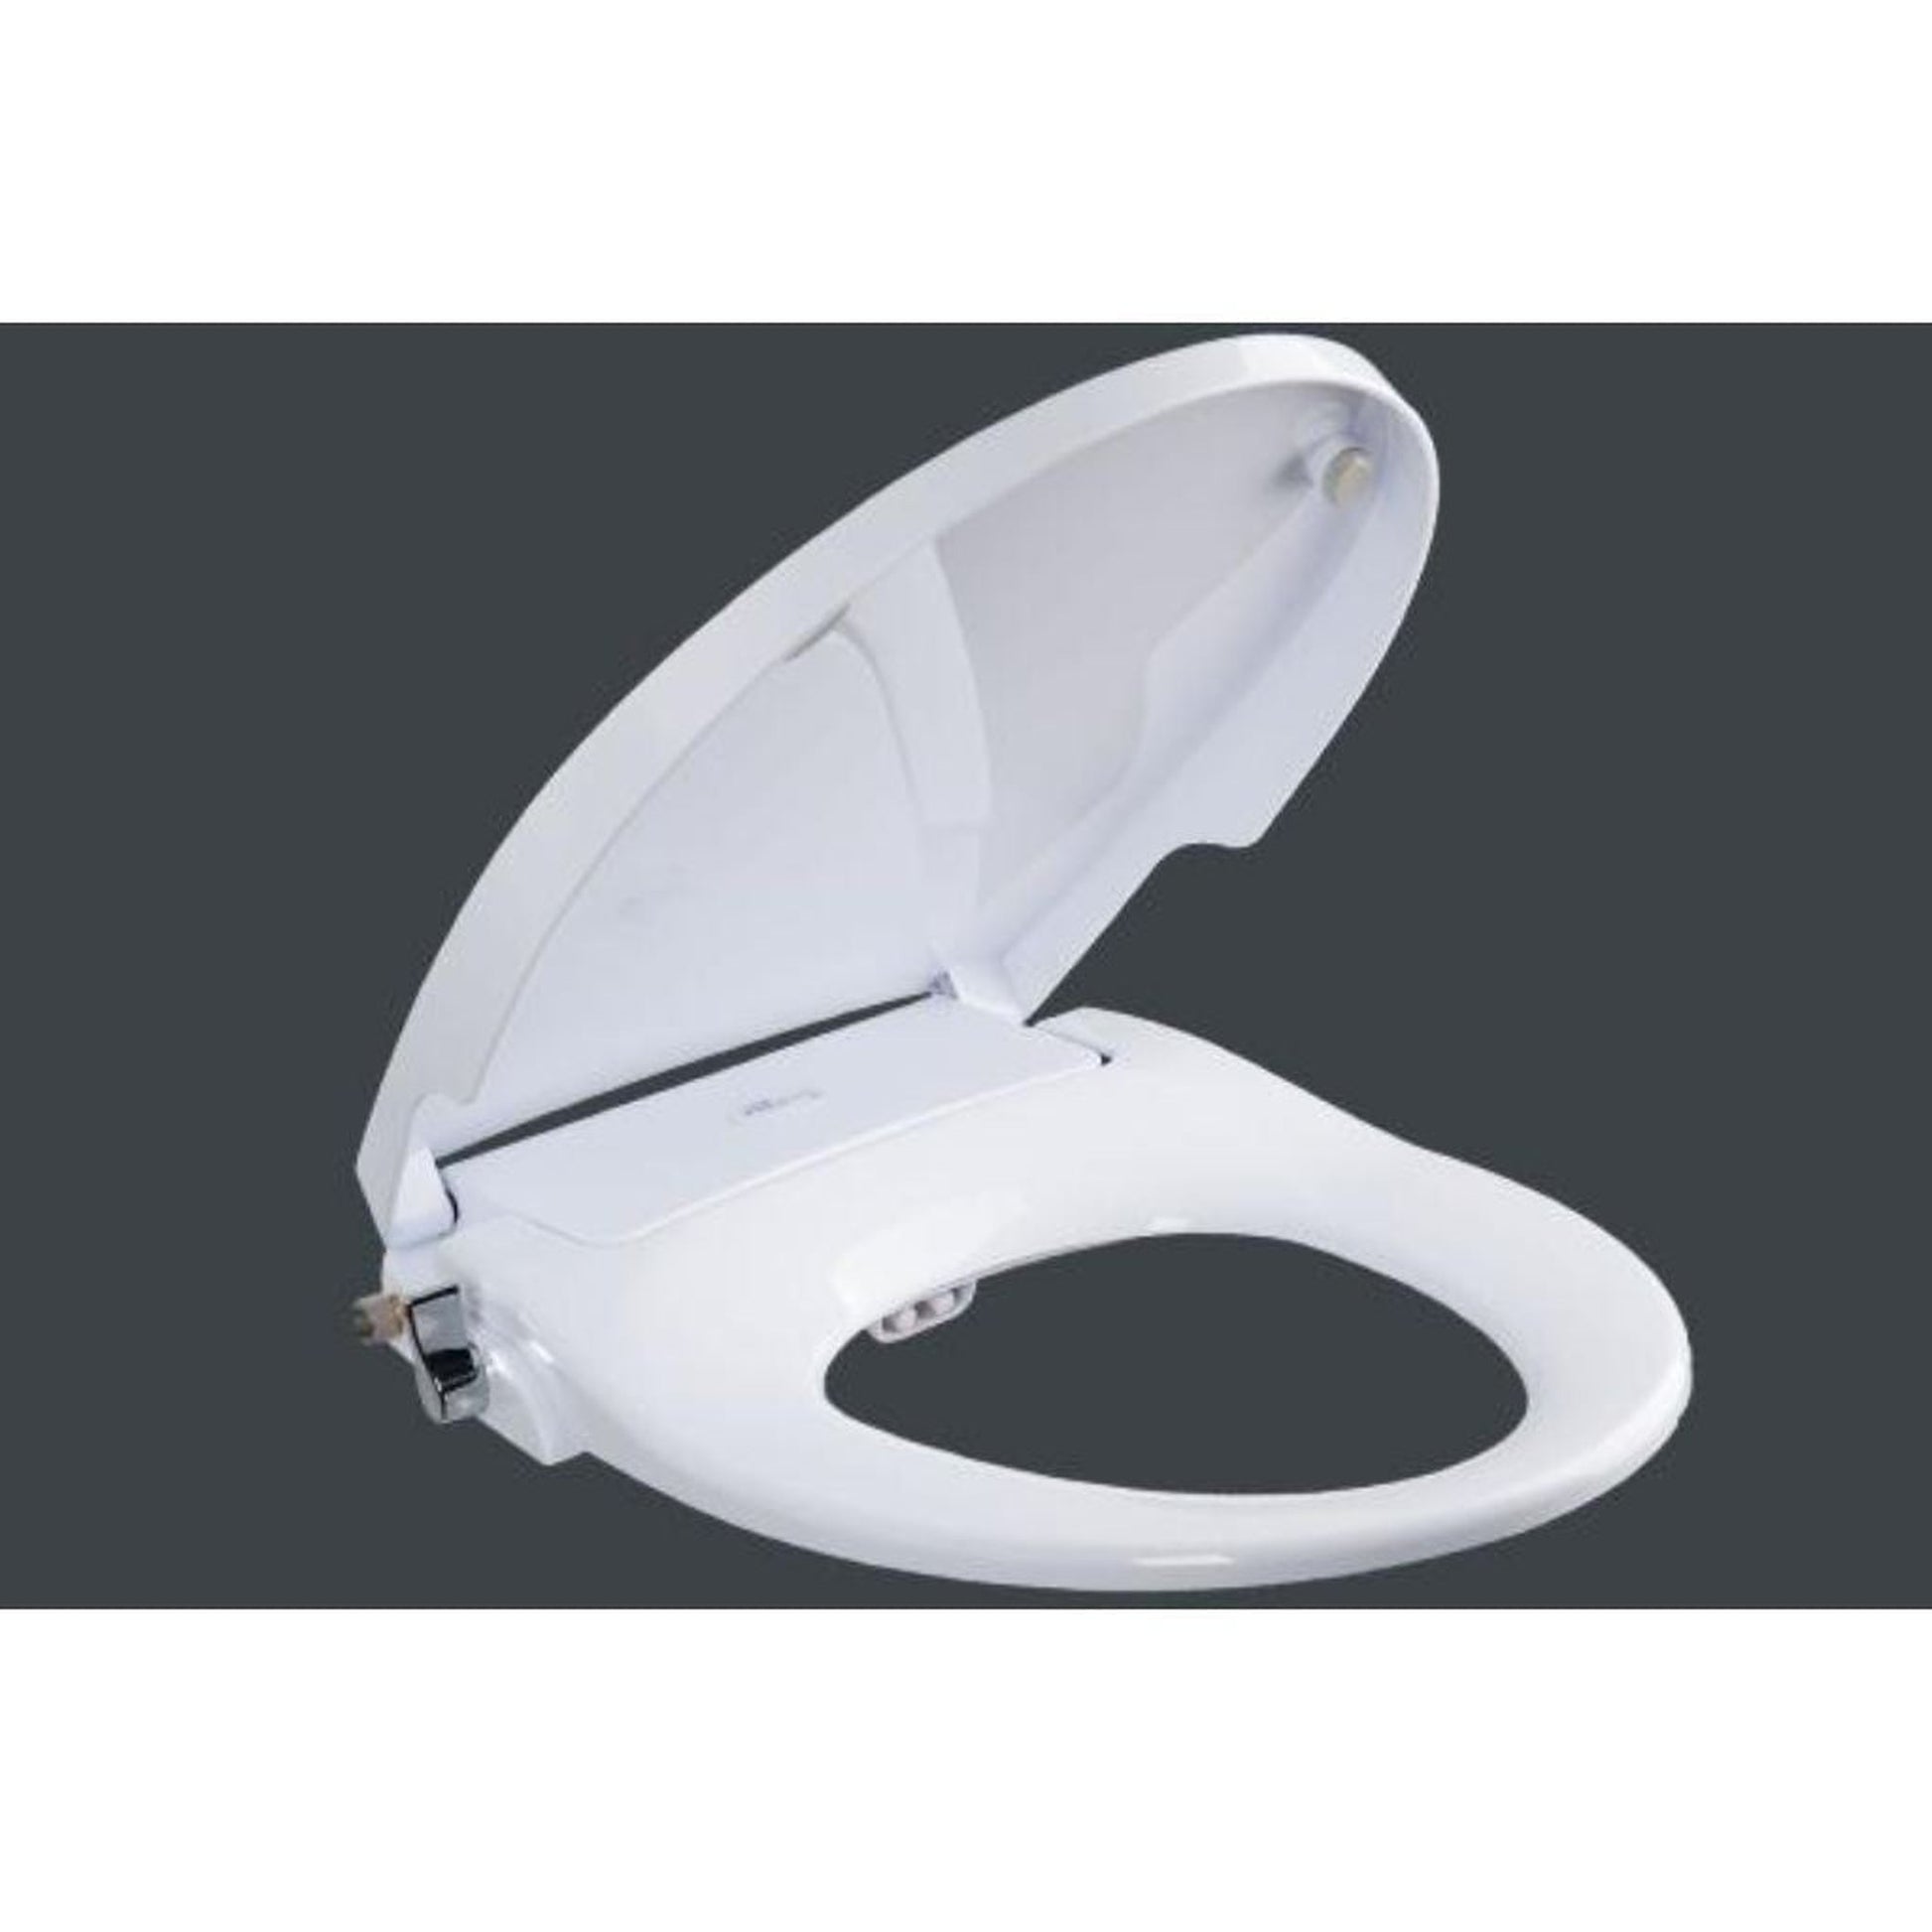 Bits and Pieces Motion Activated Toilet Bowl Light